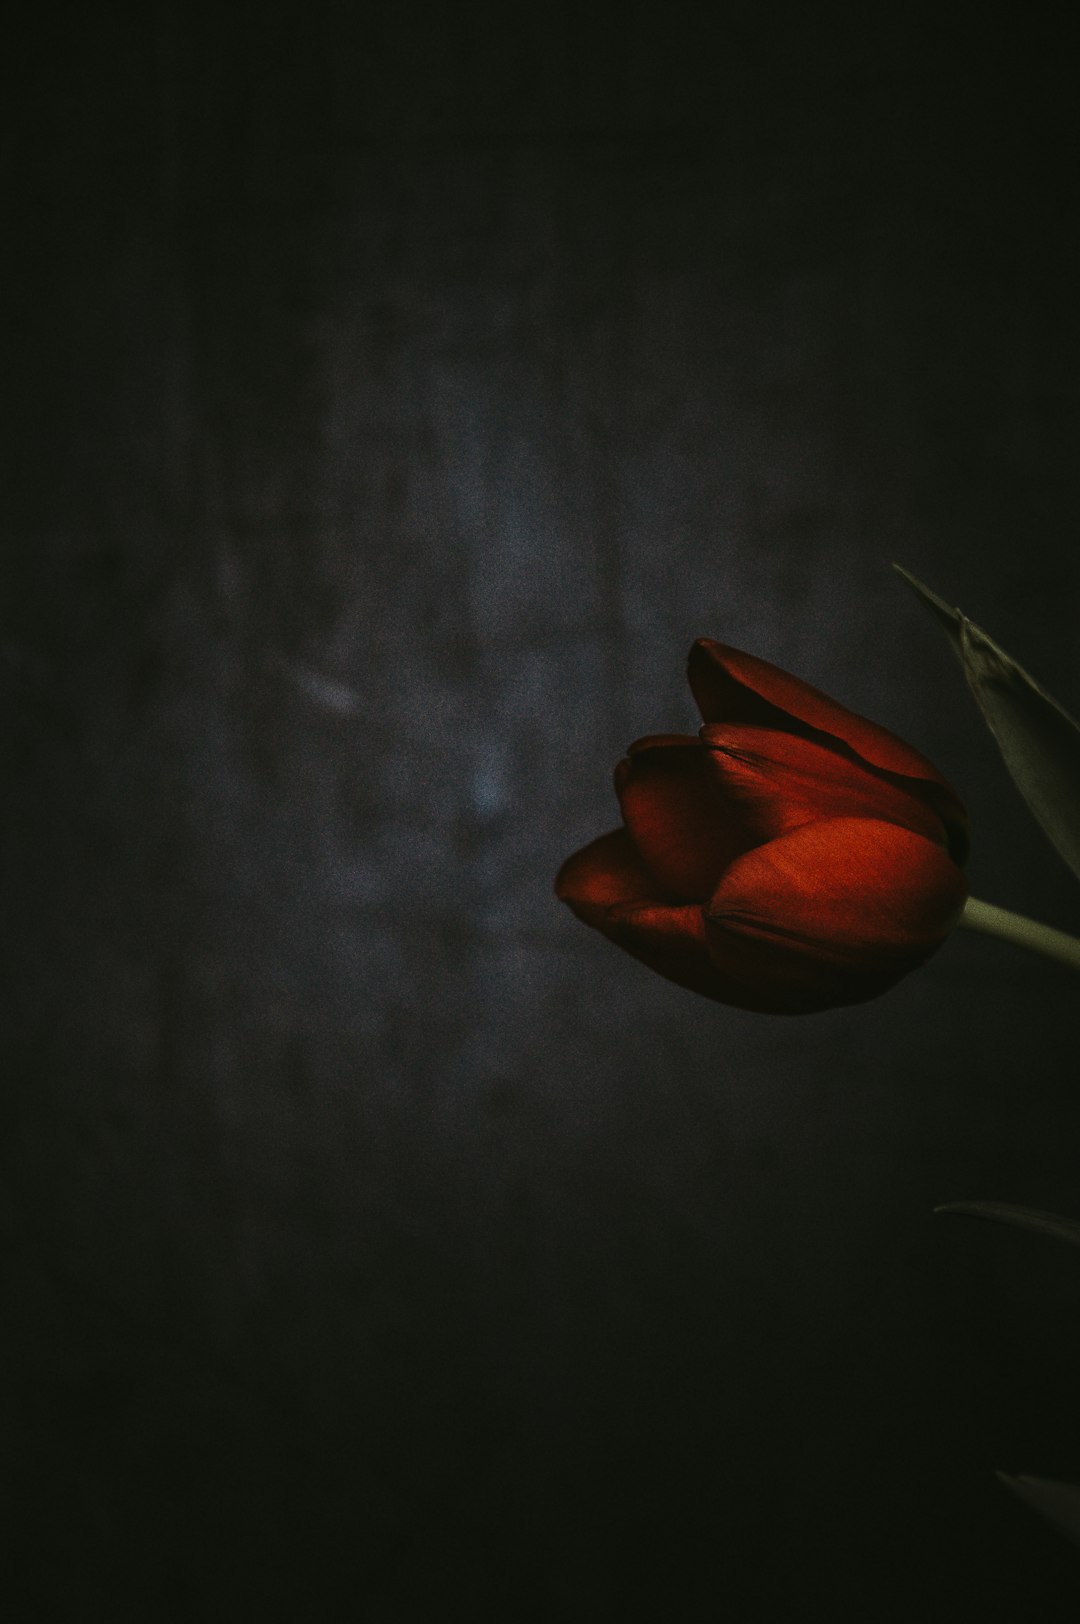 shallow focus photography of red tulips